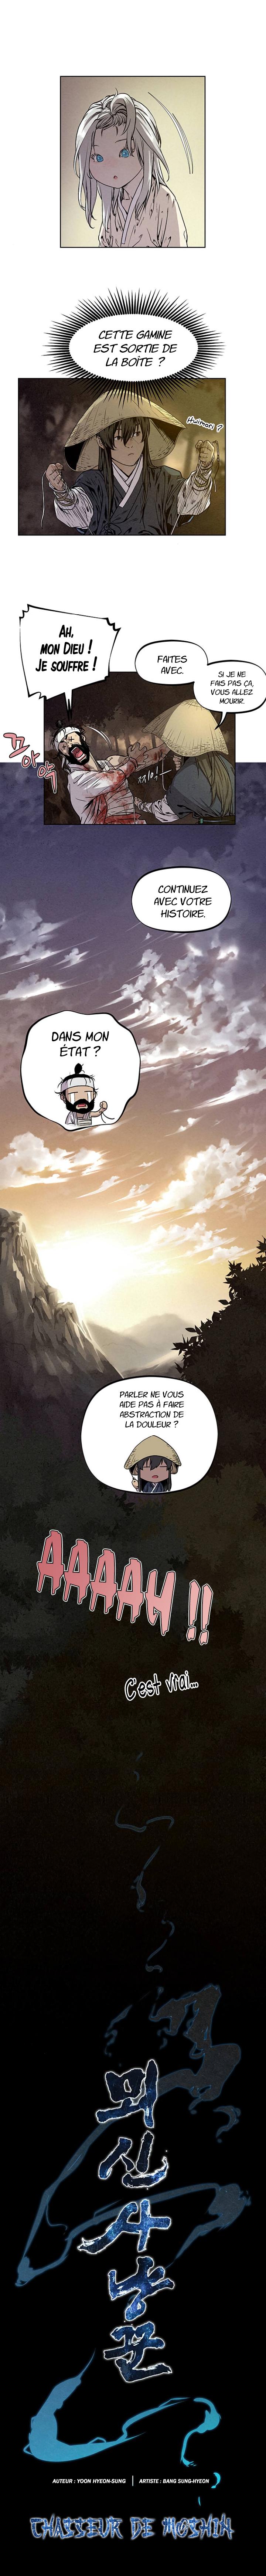 Chasseur De Moshin: Chapter 3 - Page 1